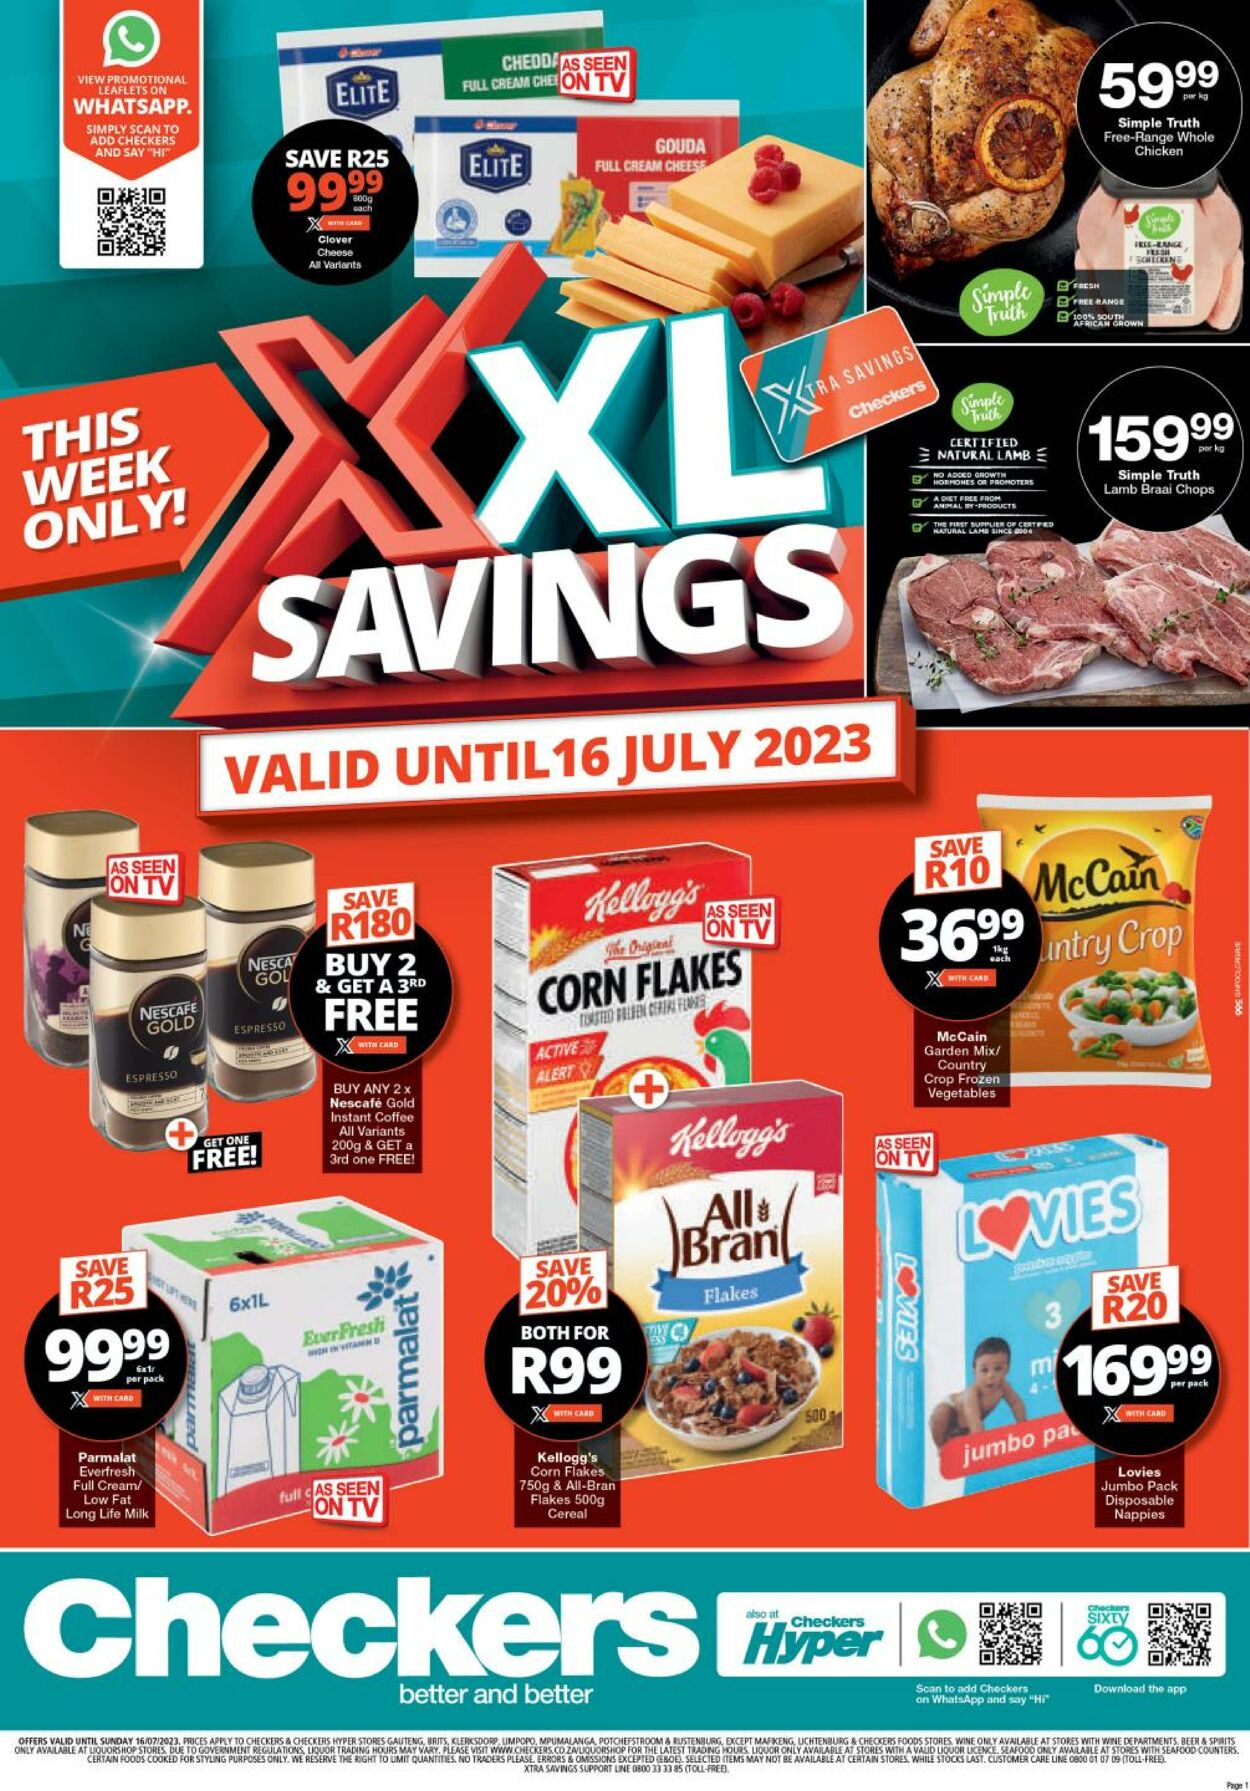 Checkers Promotional Leaflet - Valid from 13.07 to 16.07 - Page nb 1 ...